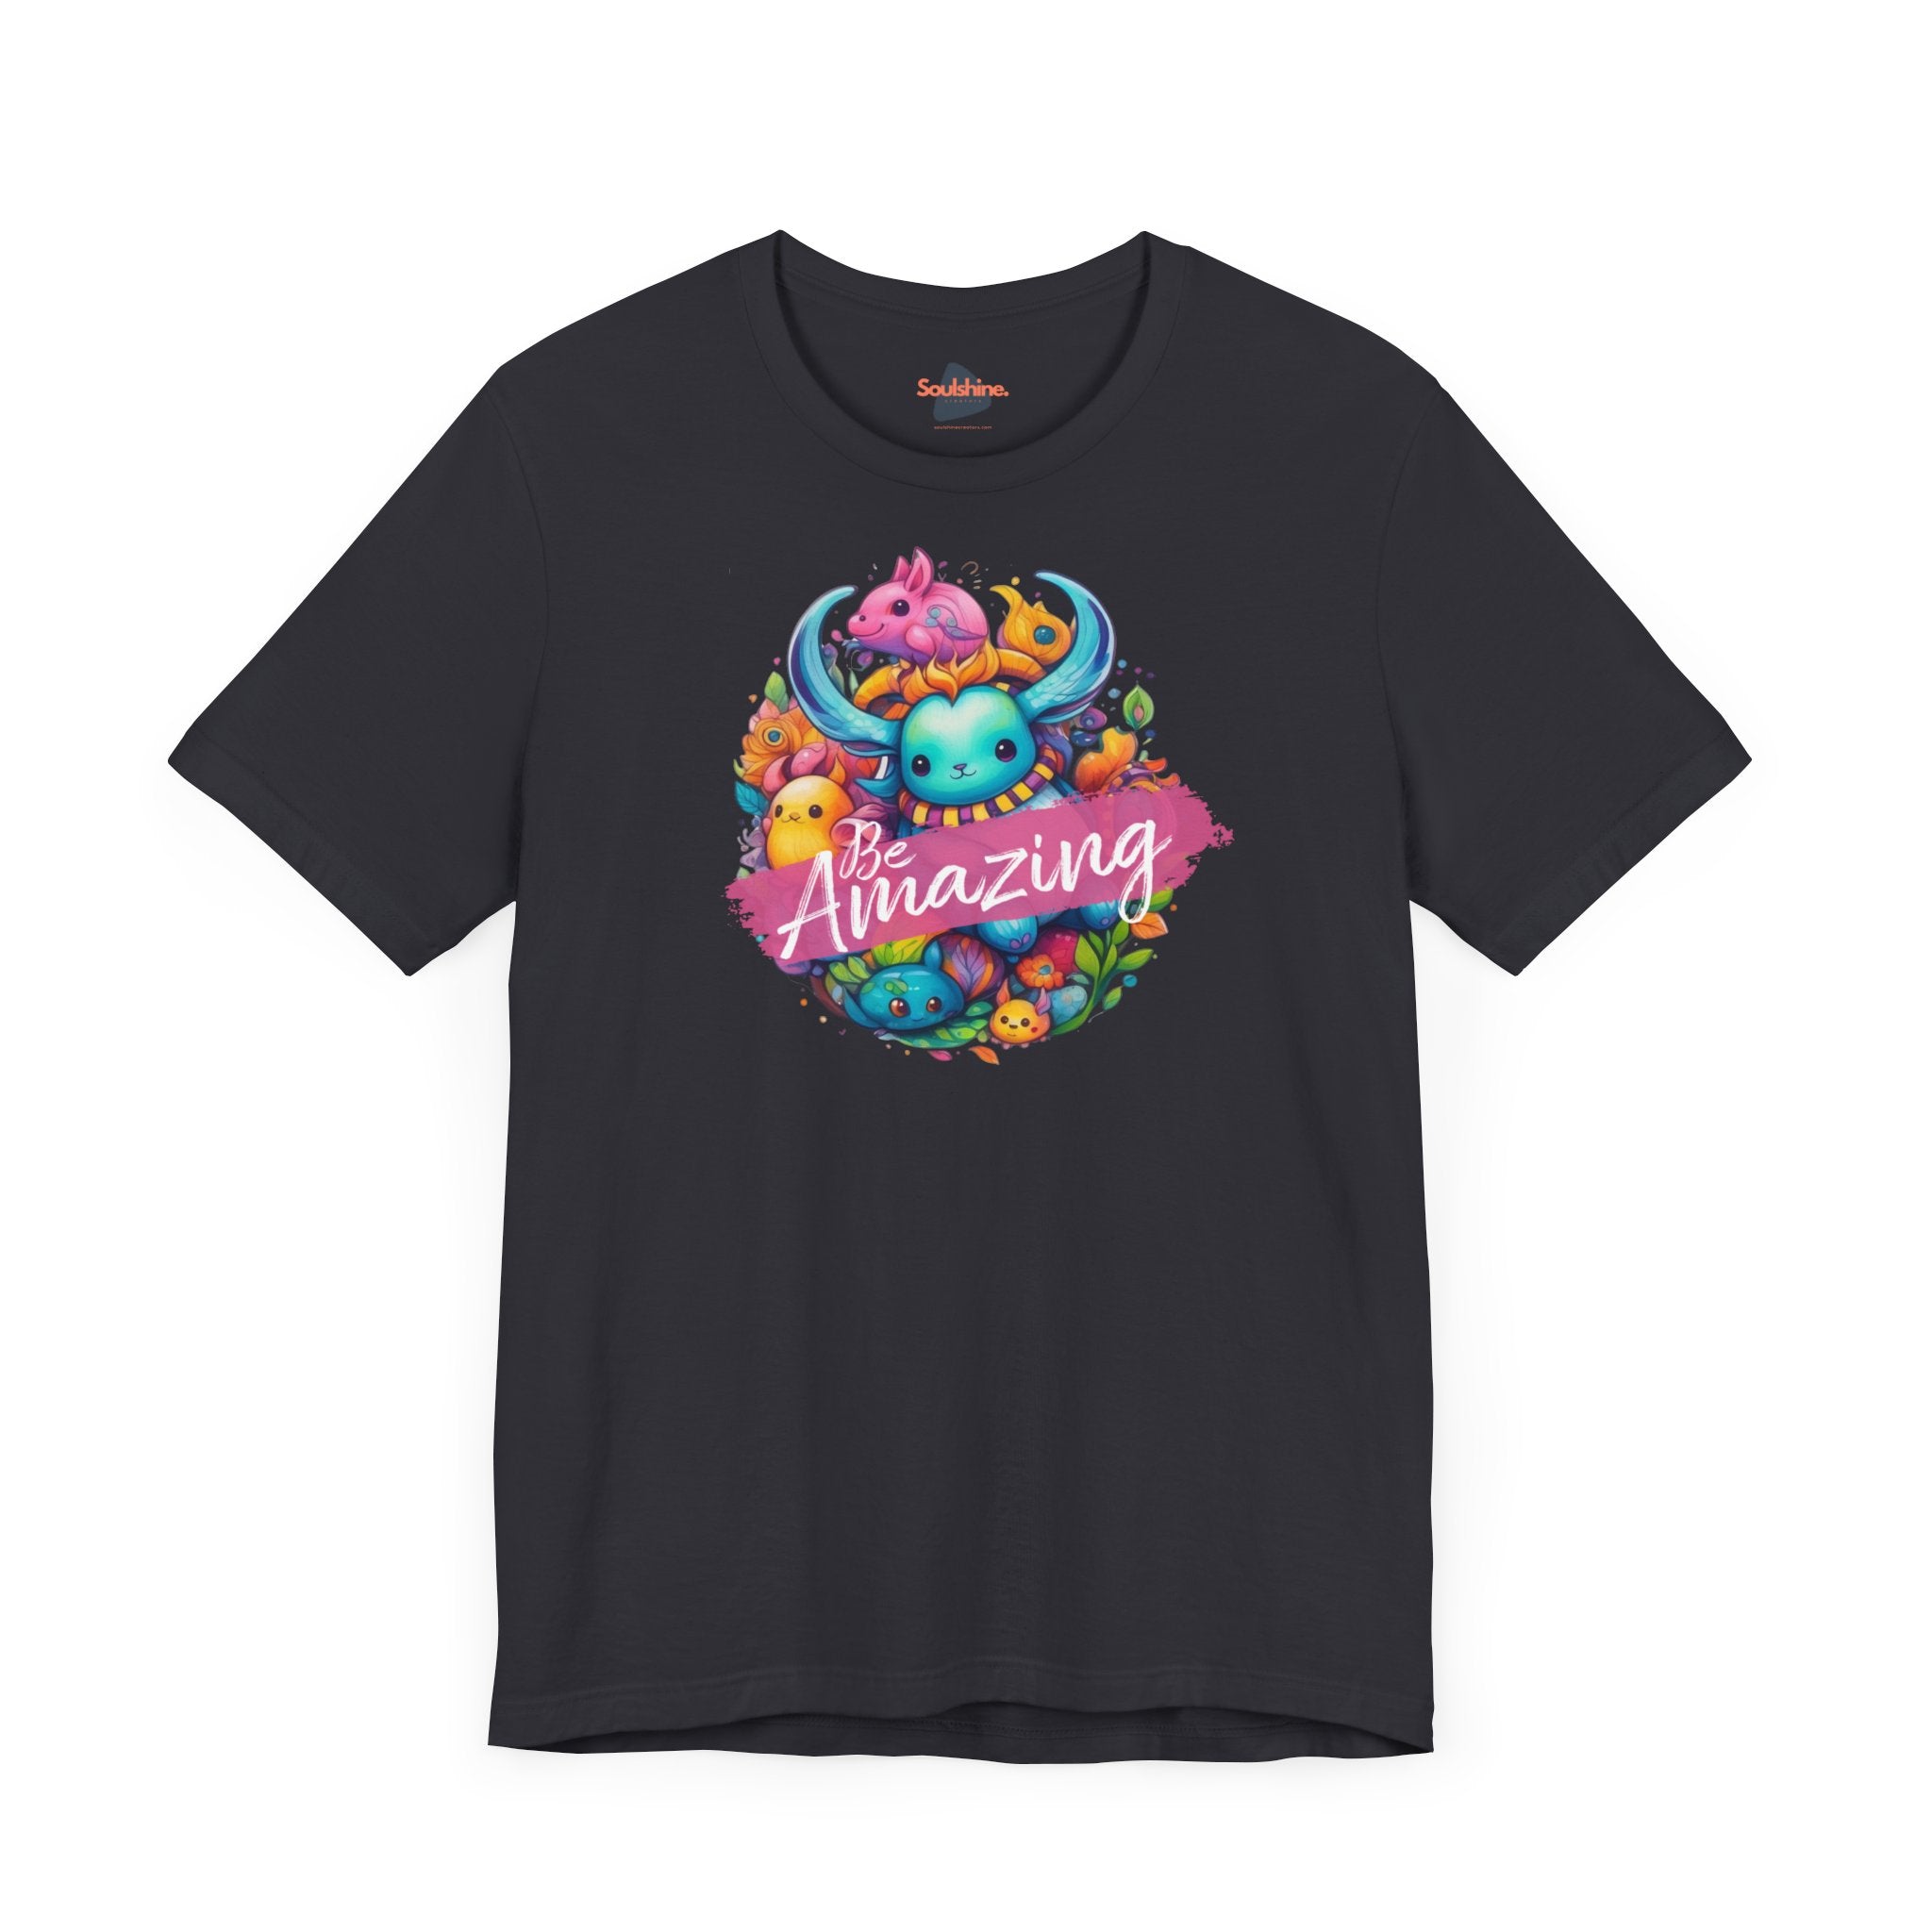 Direct-to-Garment printed black t-shirt with colorful flowers design - Be Amazing - Unisex